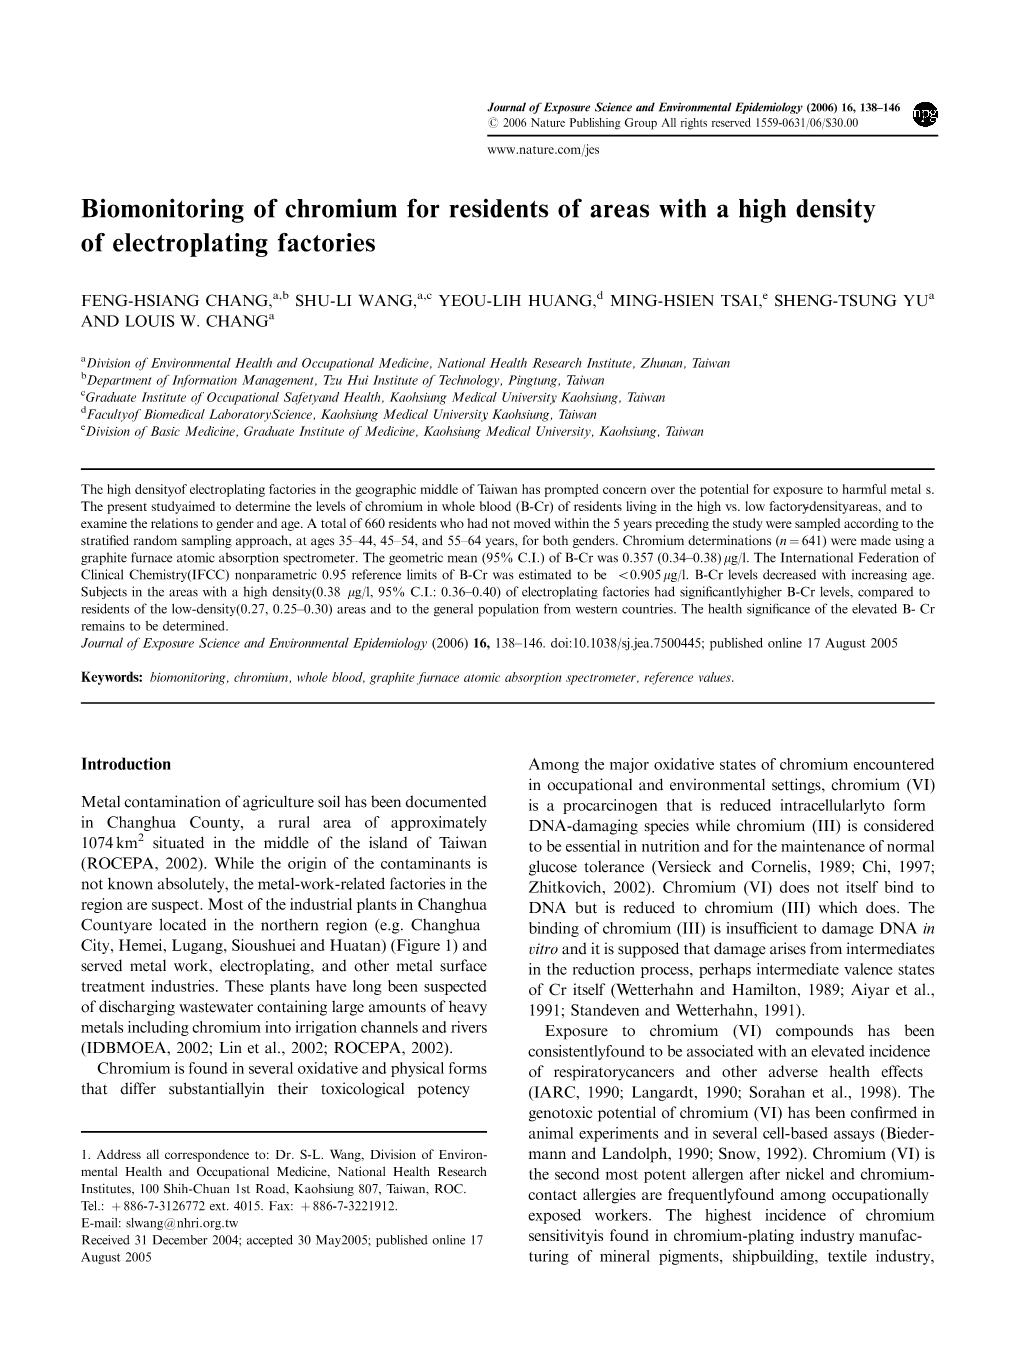 Biomonitoring of Chromium for Residents of Areas with a High Density of Electroplating Factories